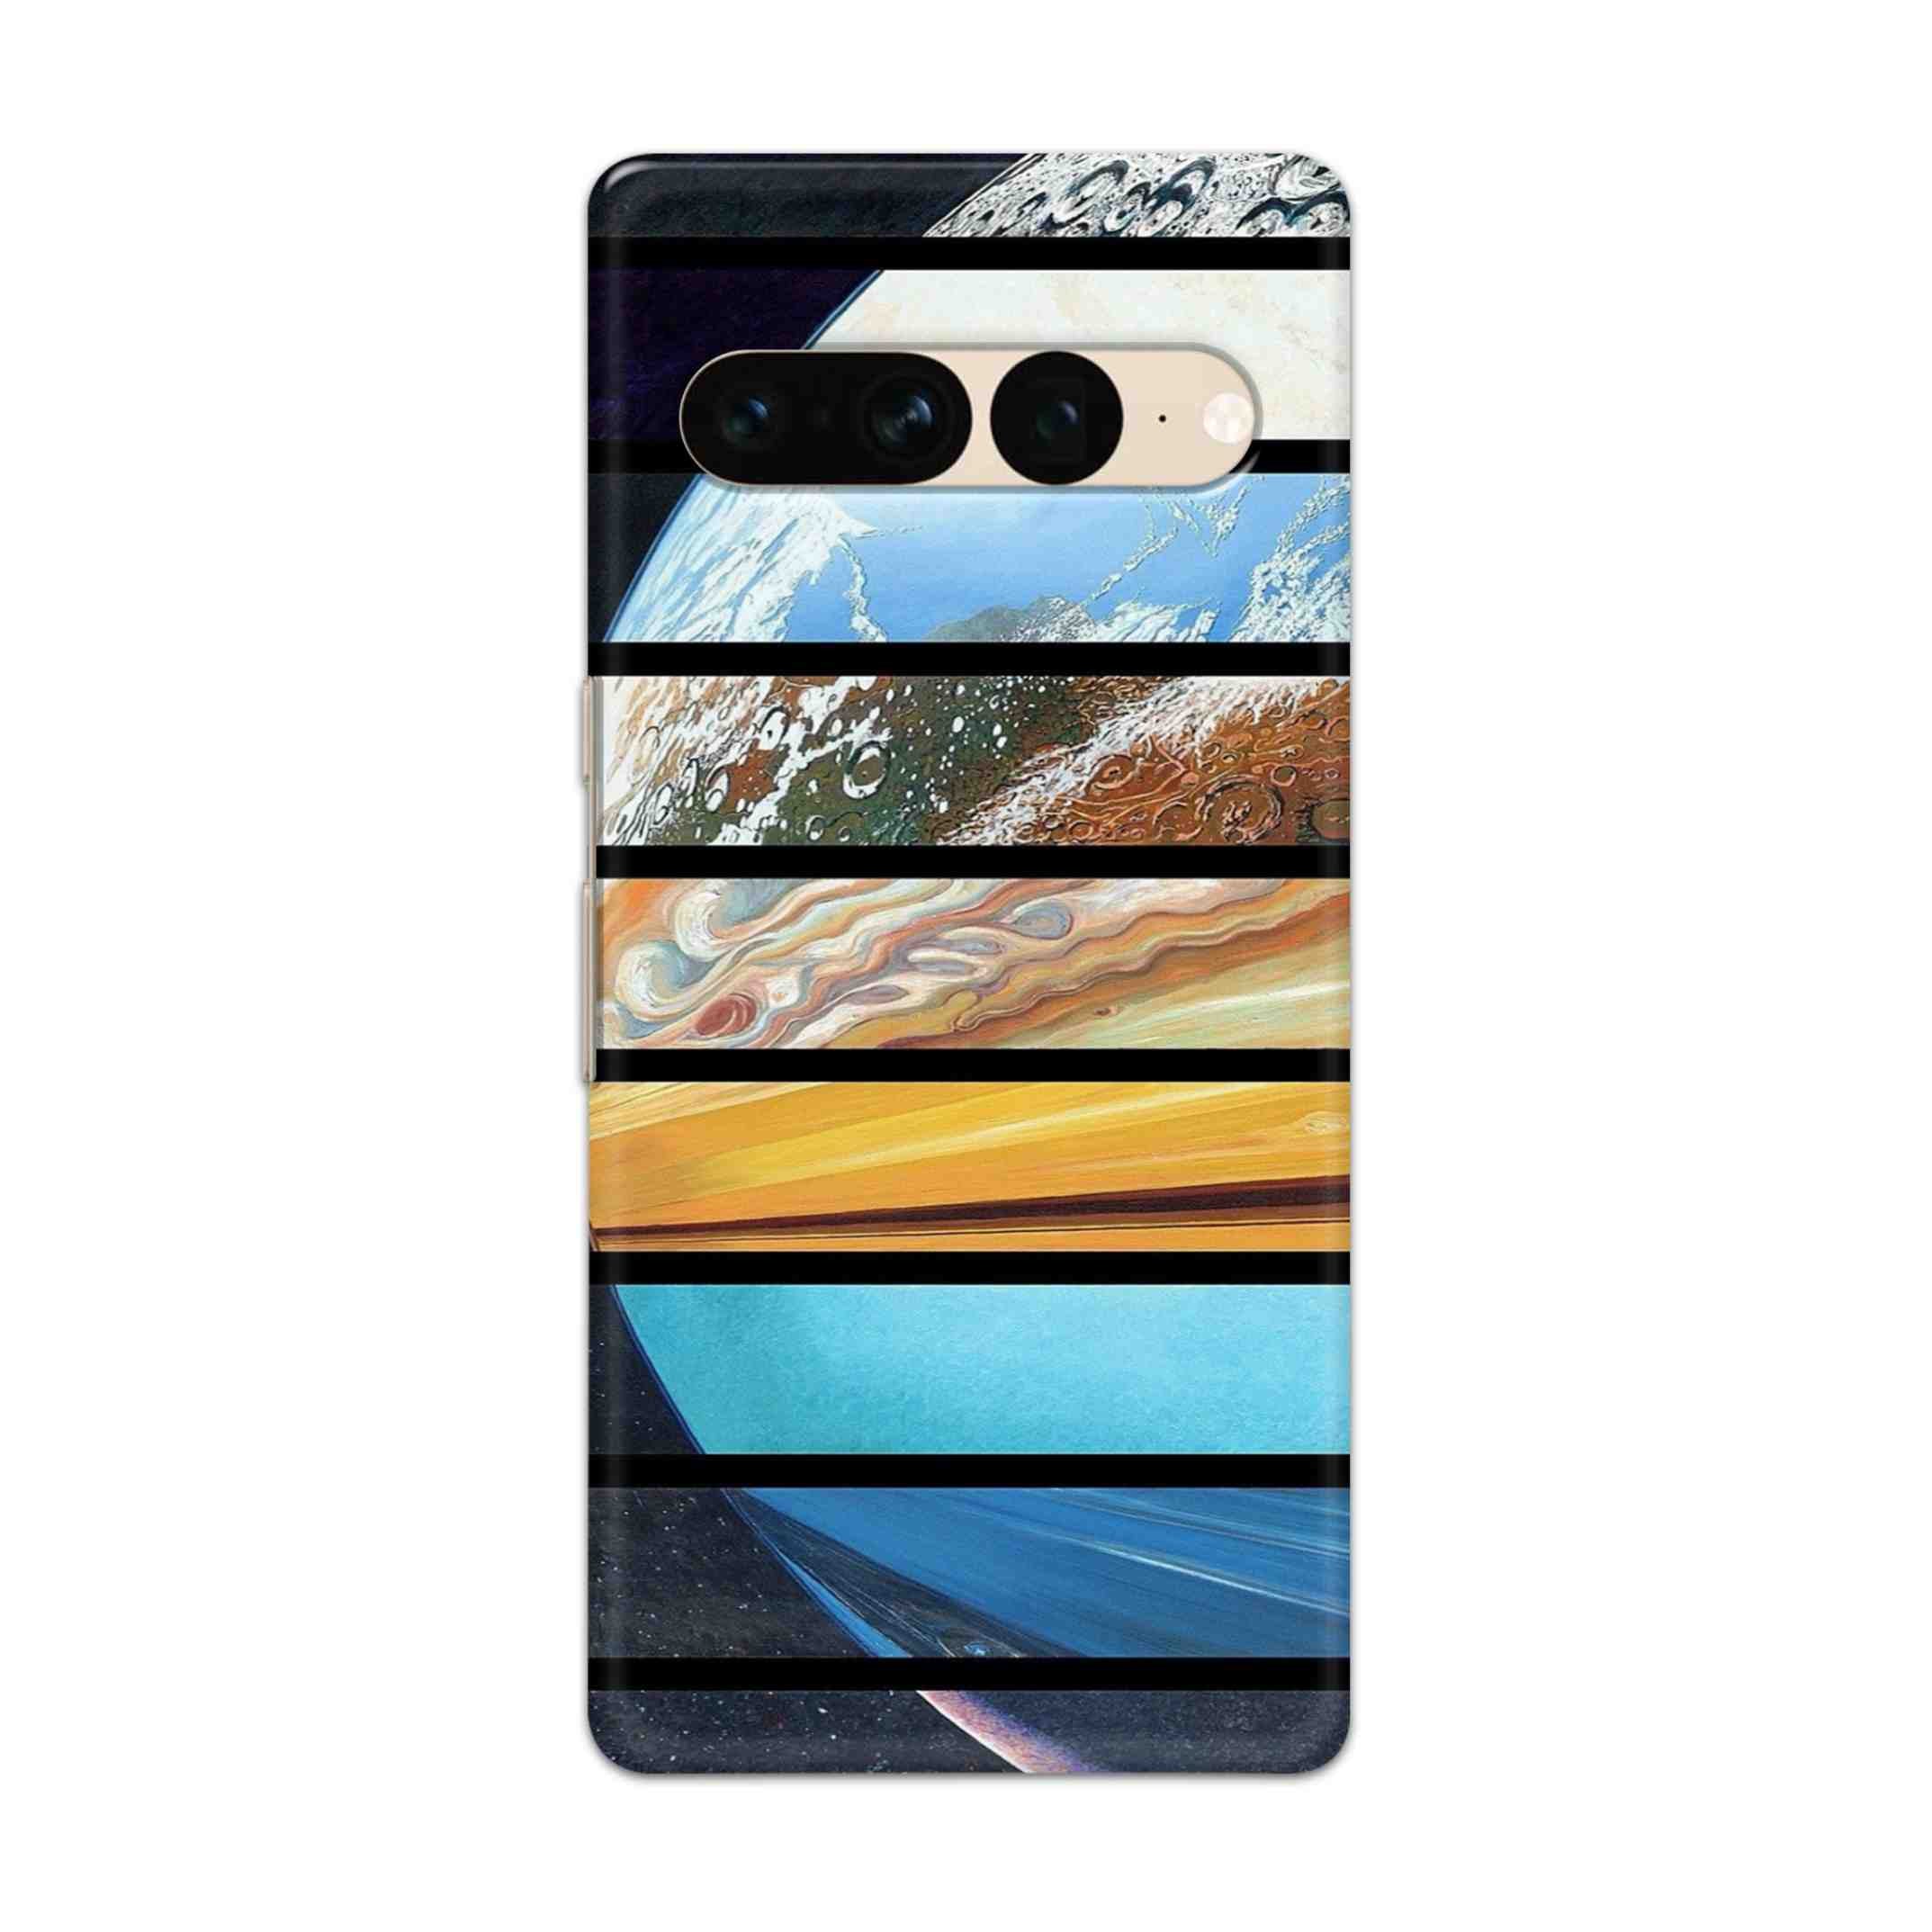 Buy Colourful Earth Hard Back Mobile Phone Case Cover For Google Pixel 7 Pro Online